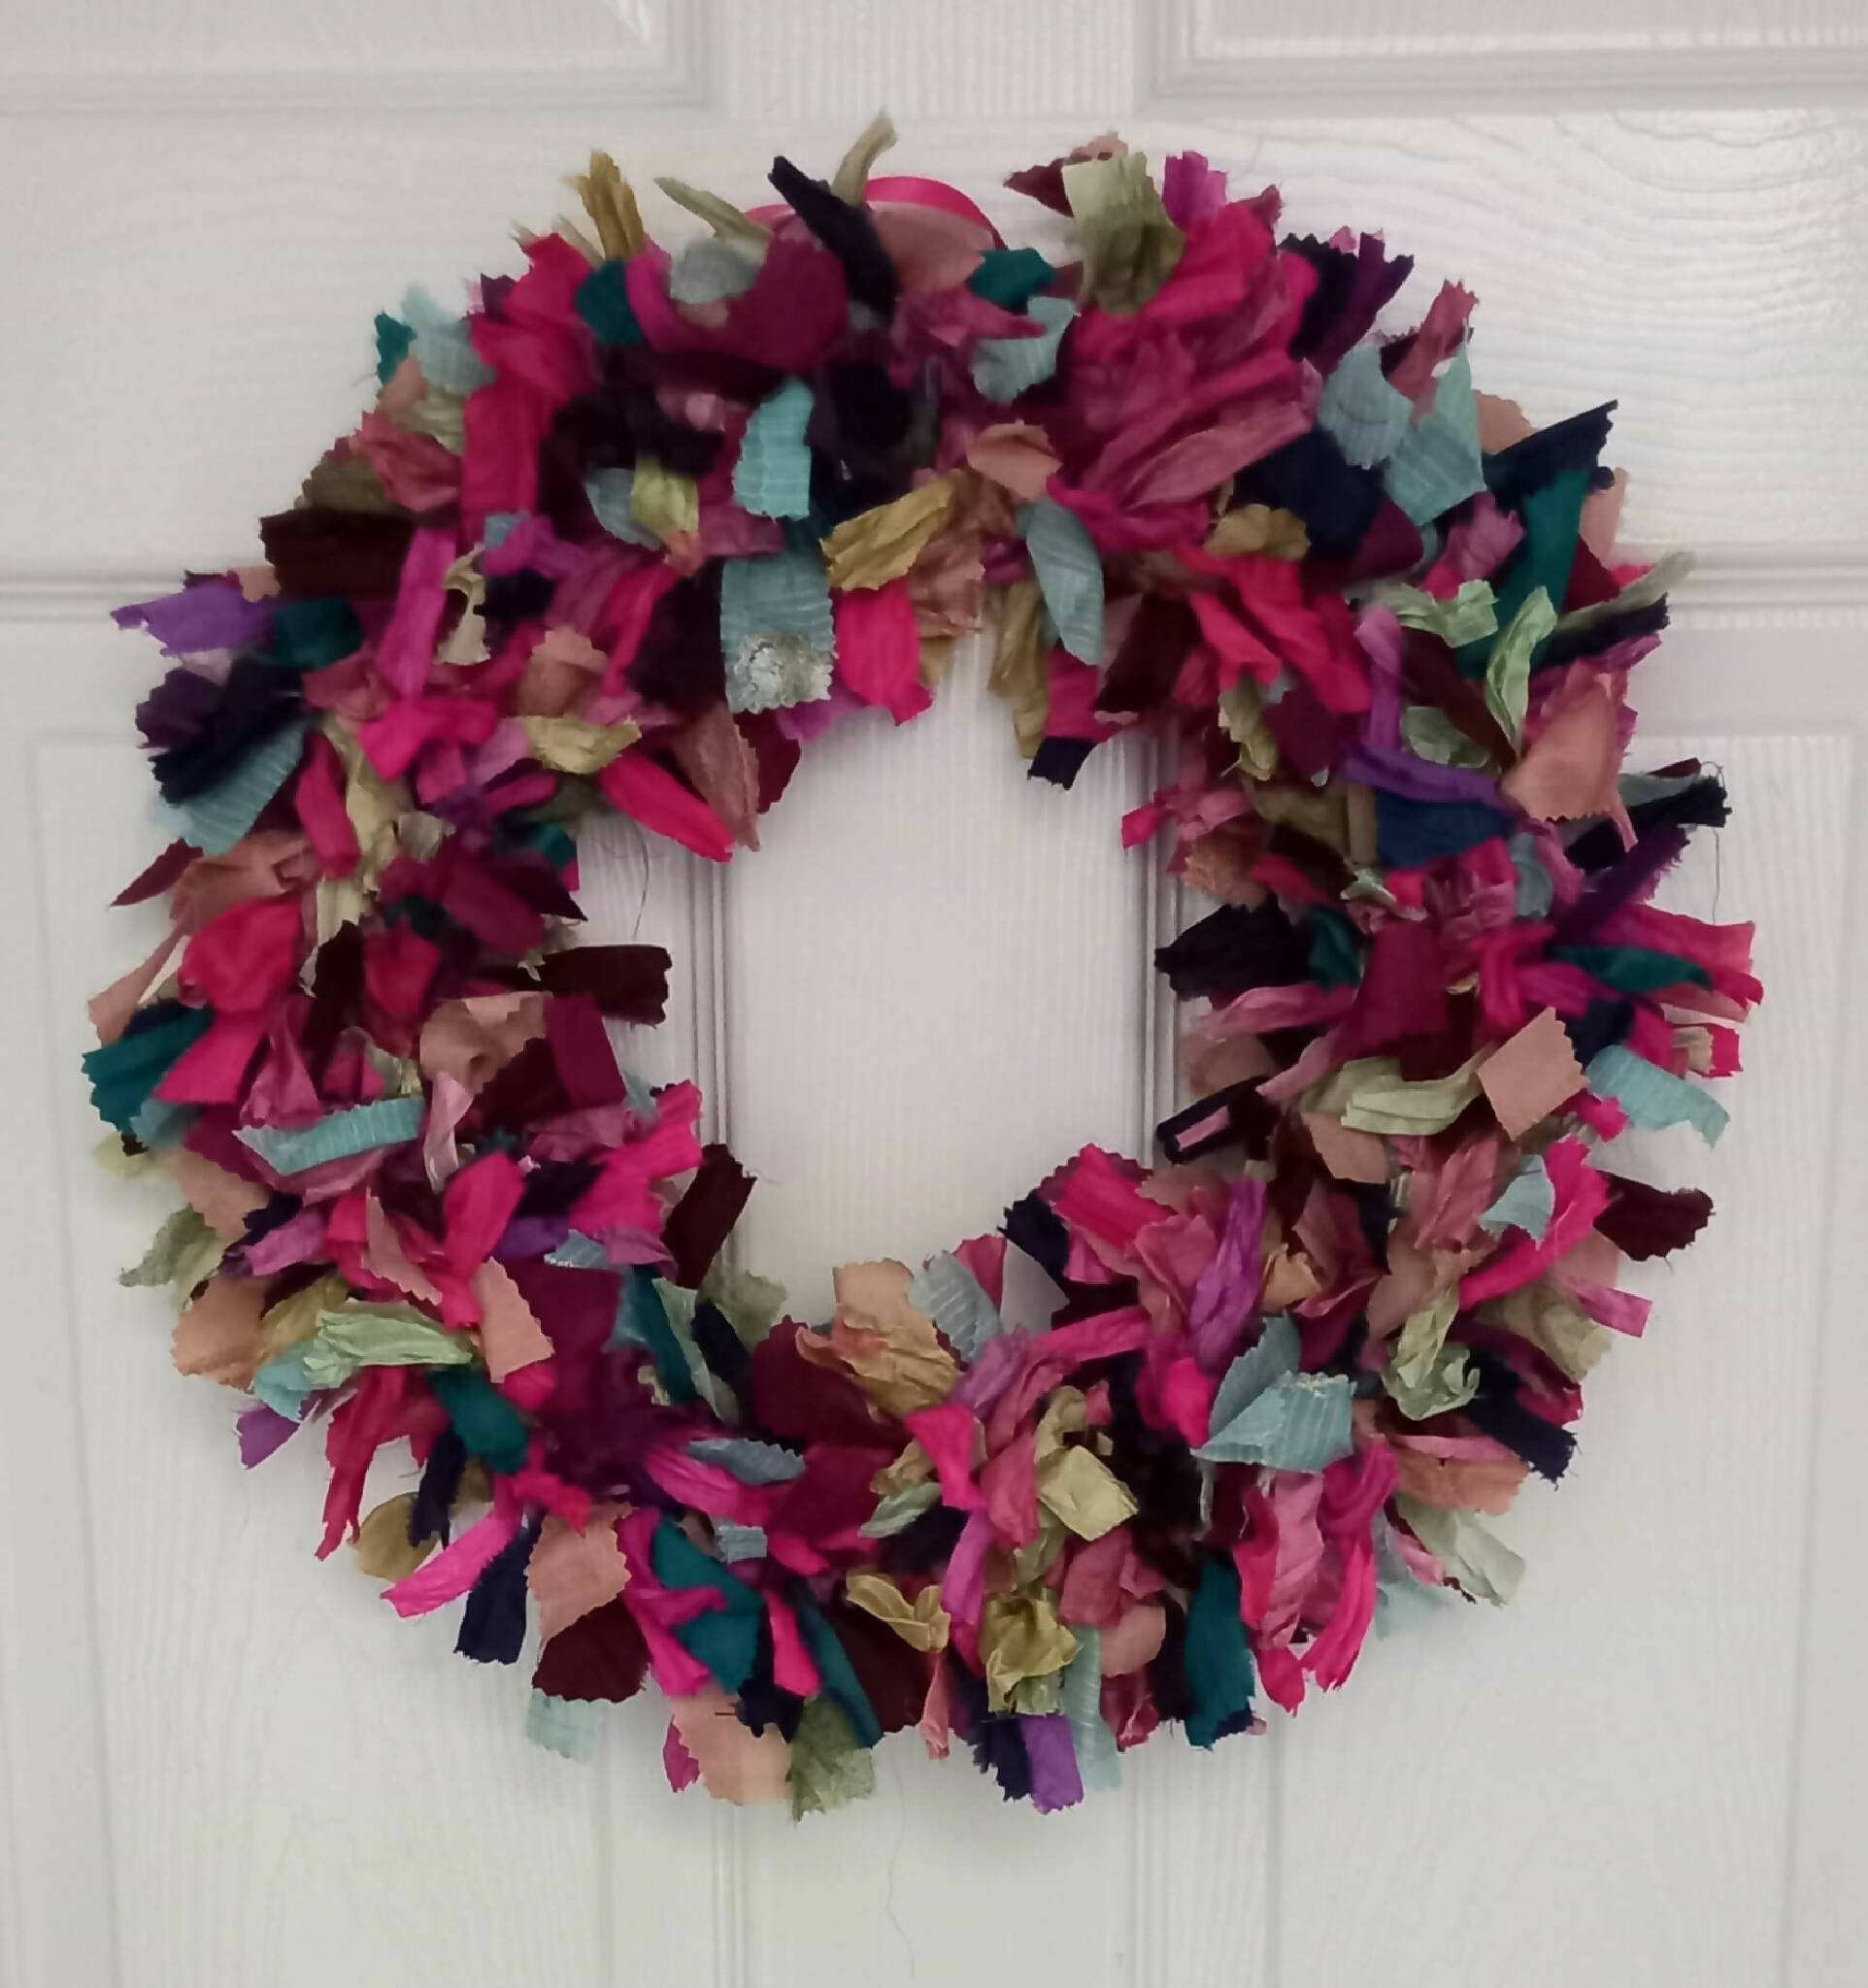 Rag Wreath in Pink and Green with Sari Ribbons